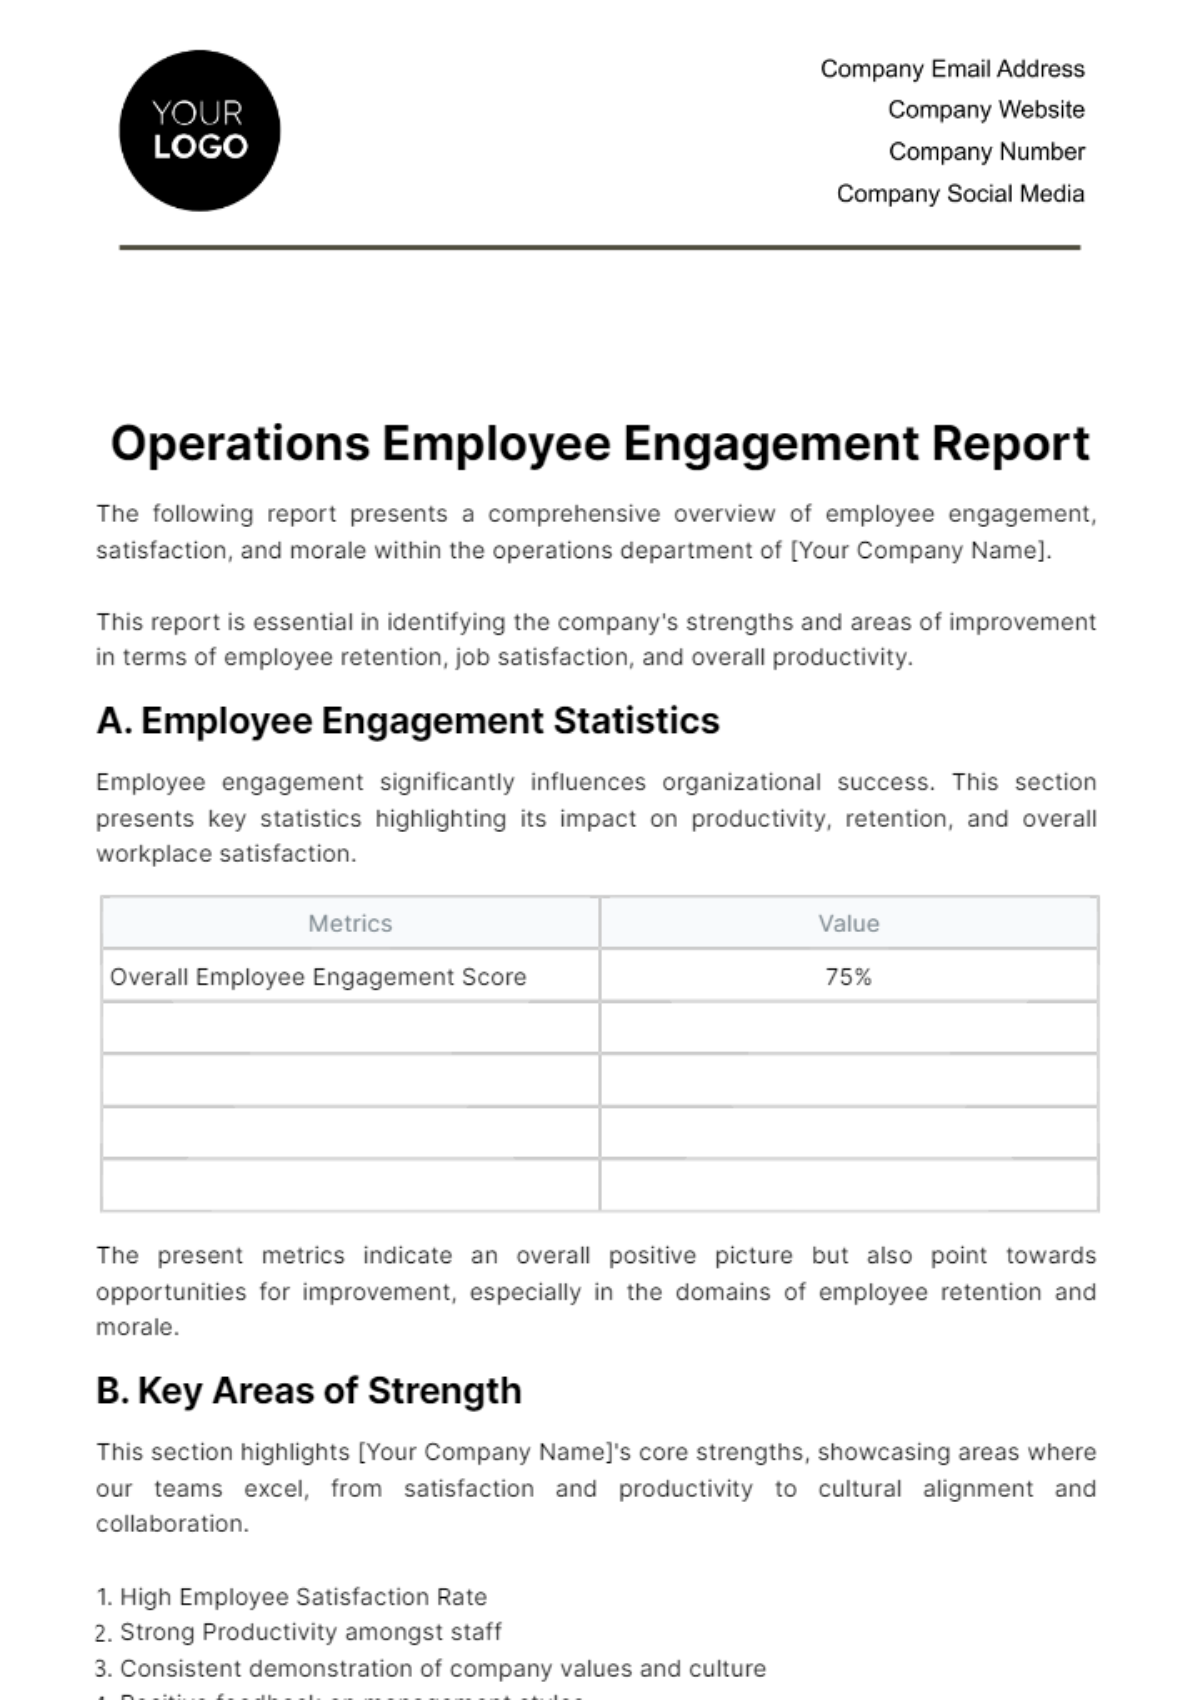 Operations Employee Engagement Report Template